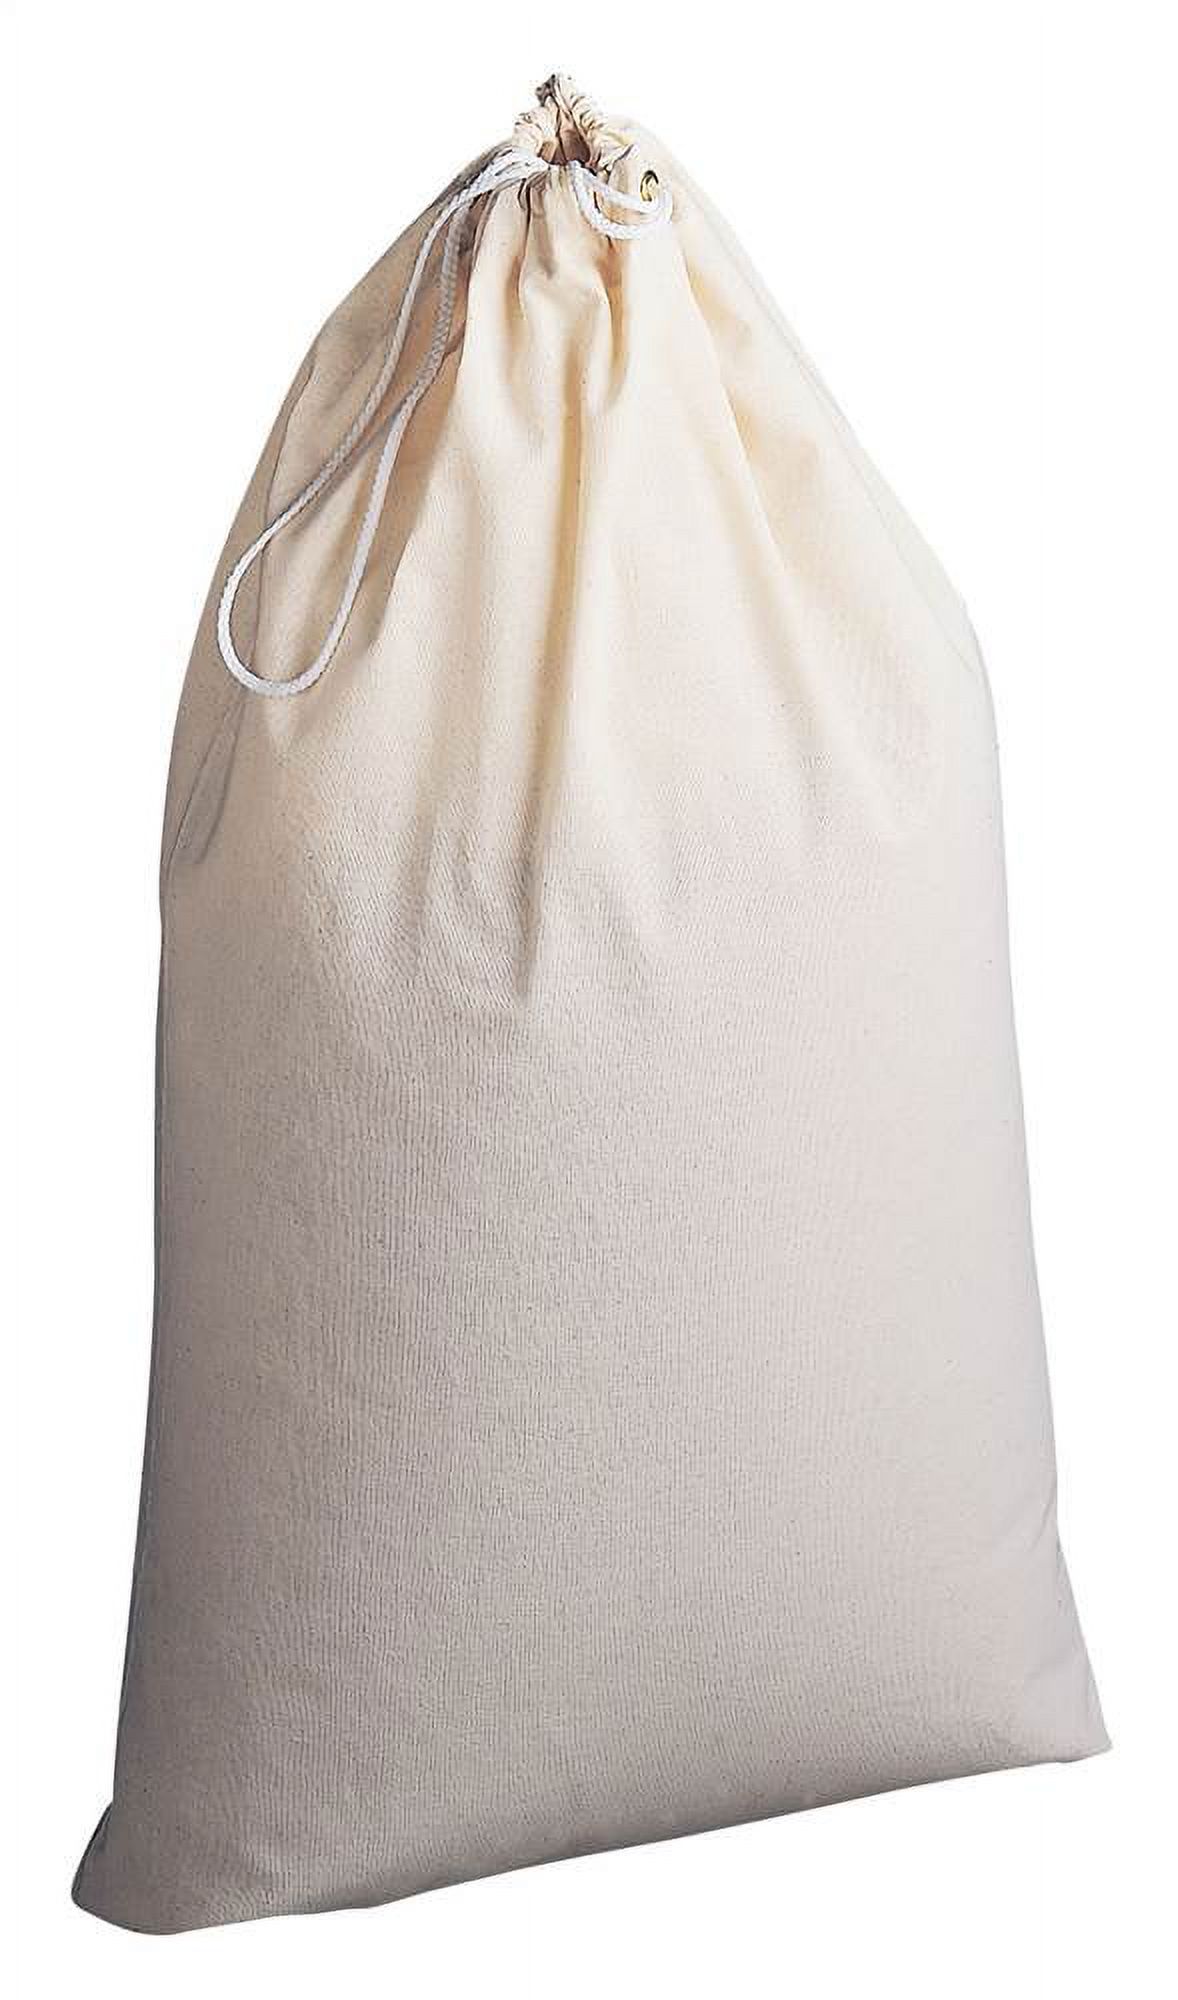 Household Essentials Extra Large Natural Cotton Laundry Bag, Beige - image 1 of 3